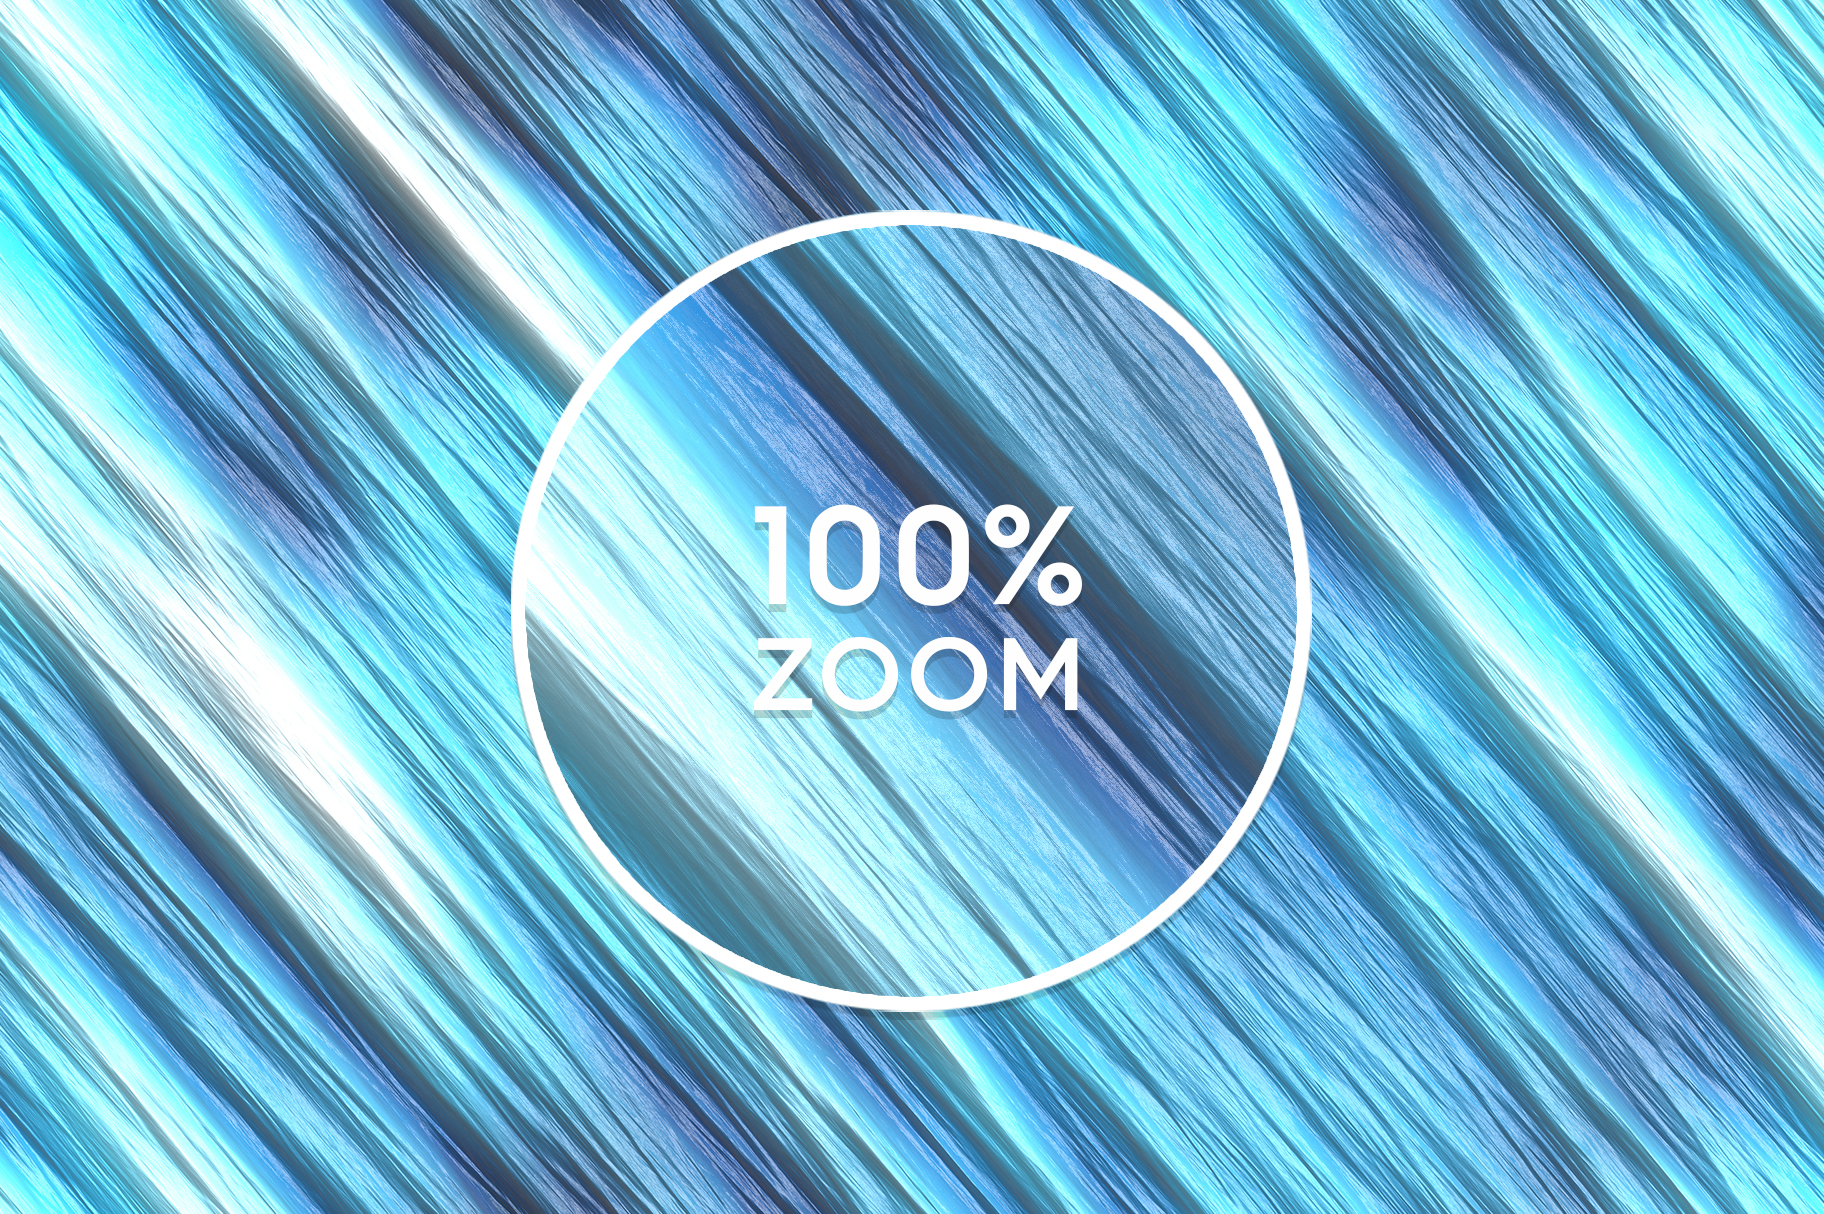 10 Noise Storm Background Textures. Seamless Transition. 100% Zoom.